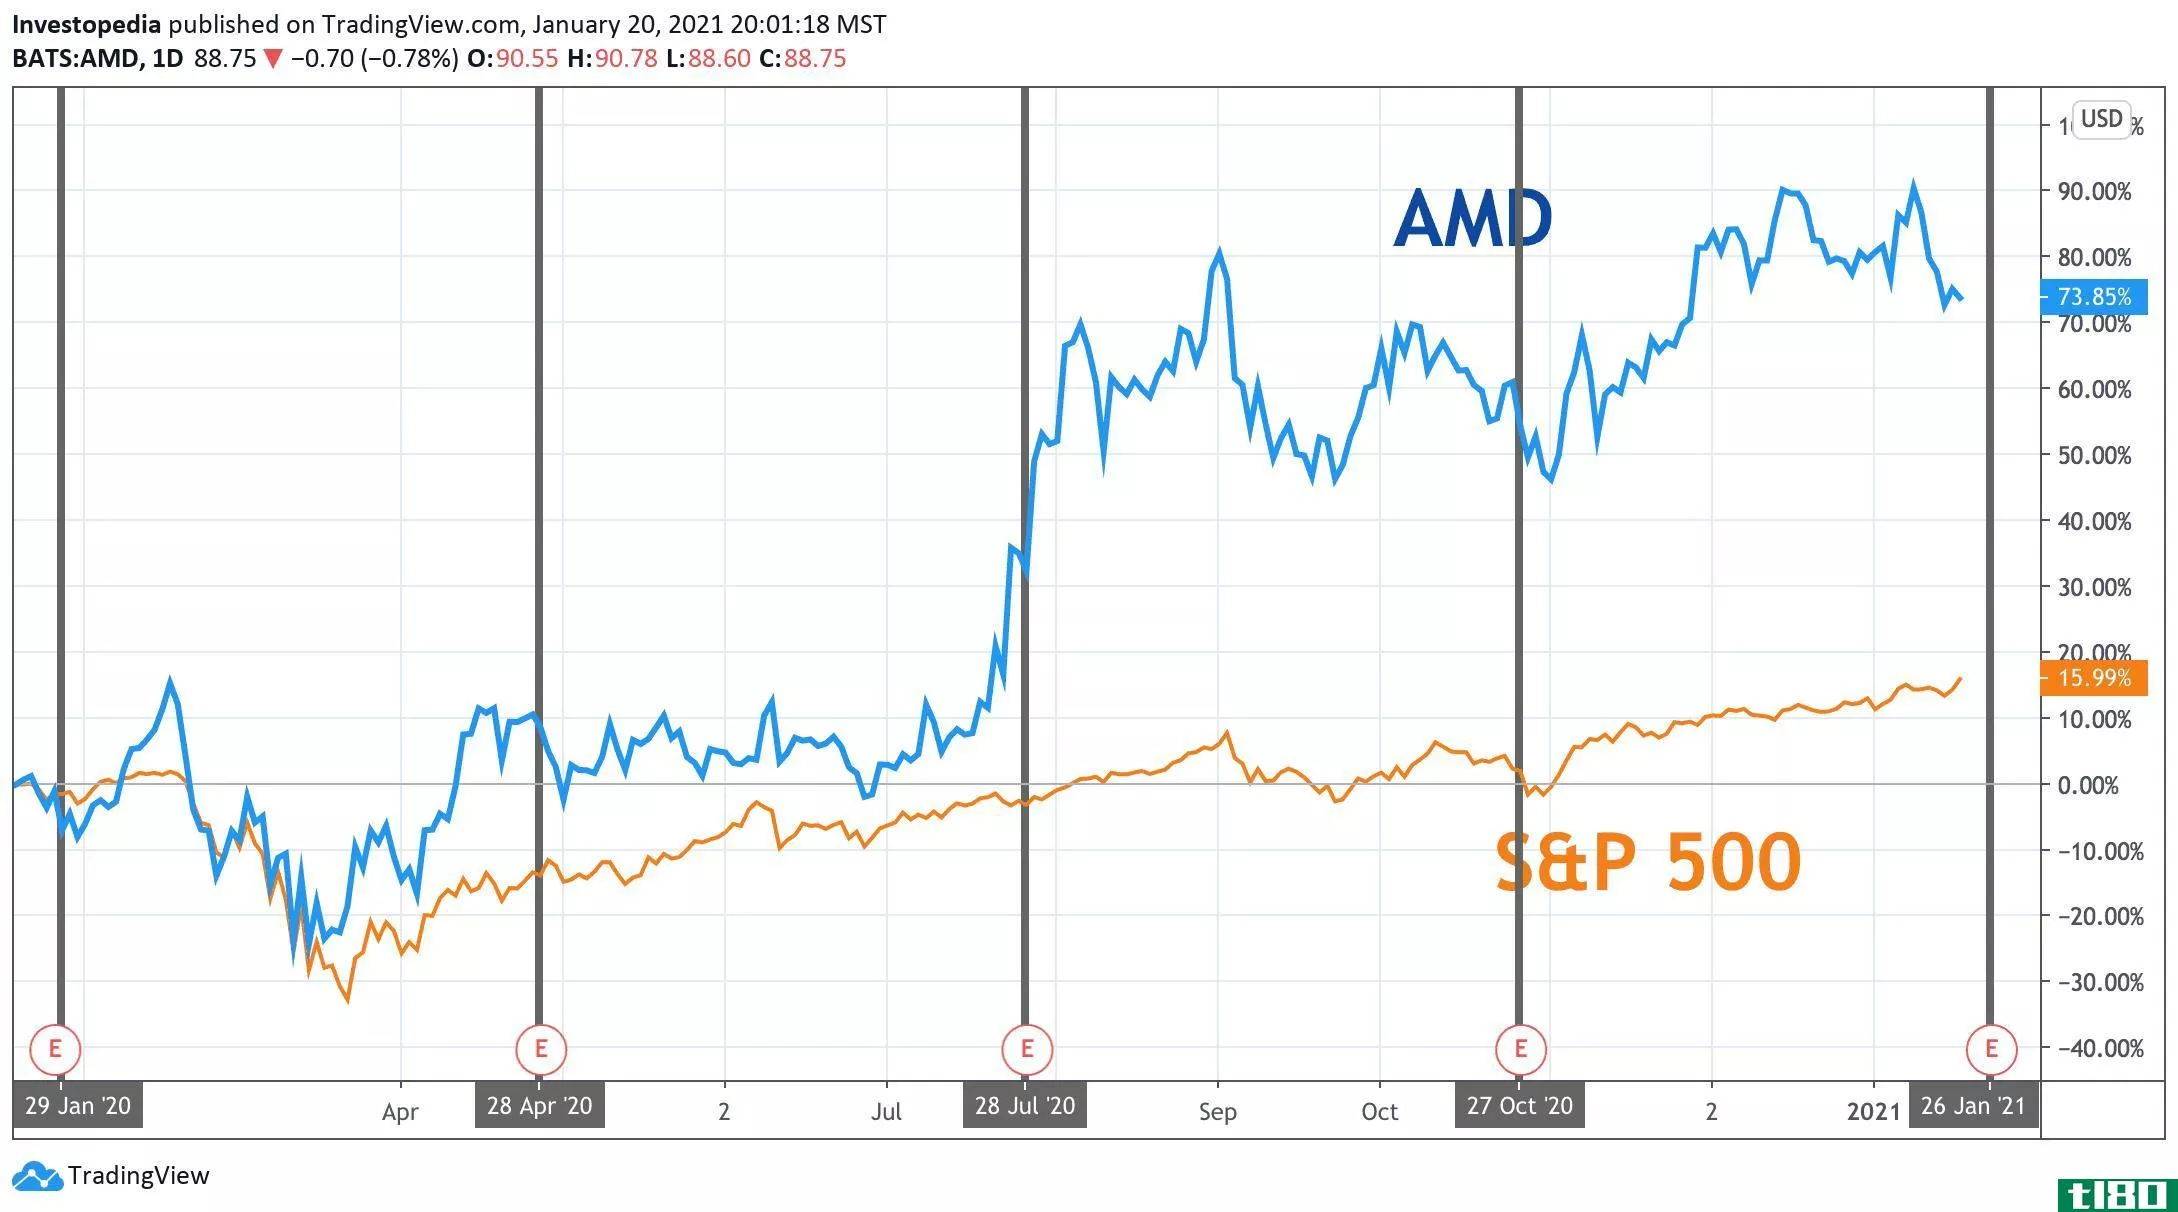 One Year Total Return for S&P 500 and AMD